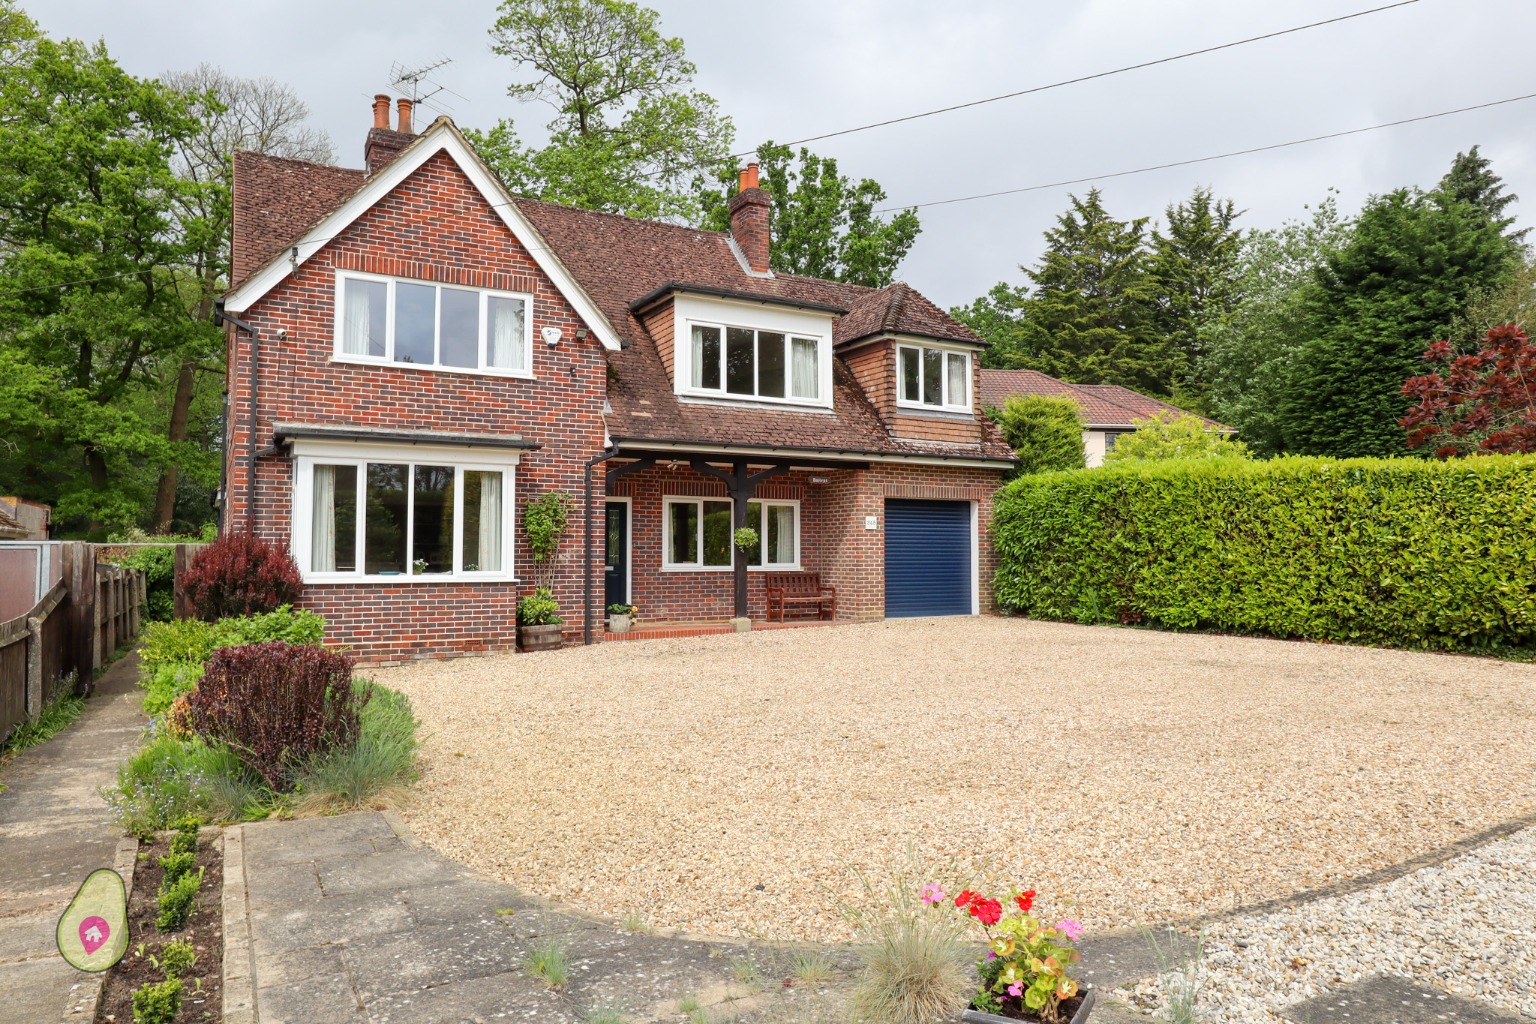 4 bed detached house for sale in Farnborough Road, Farnborough - Property Image 1